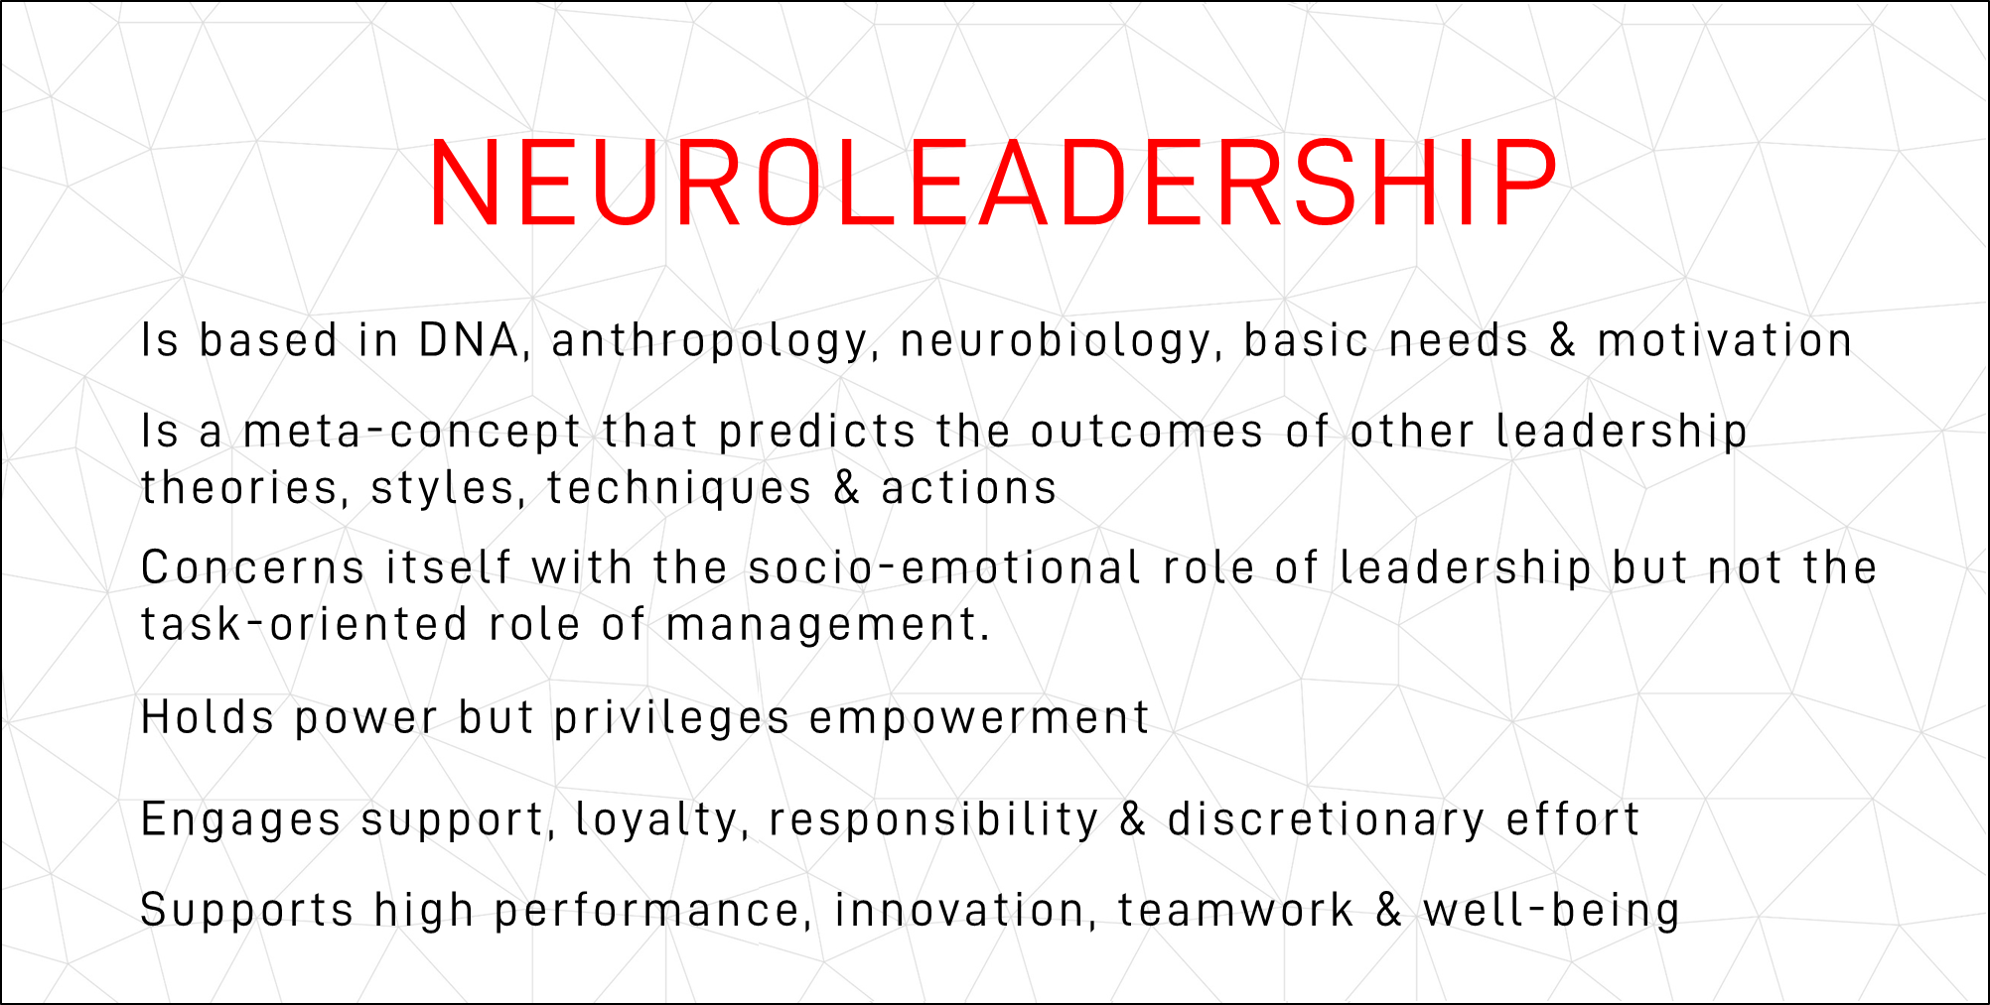 Graphic: What is Neuroleadership?